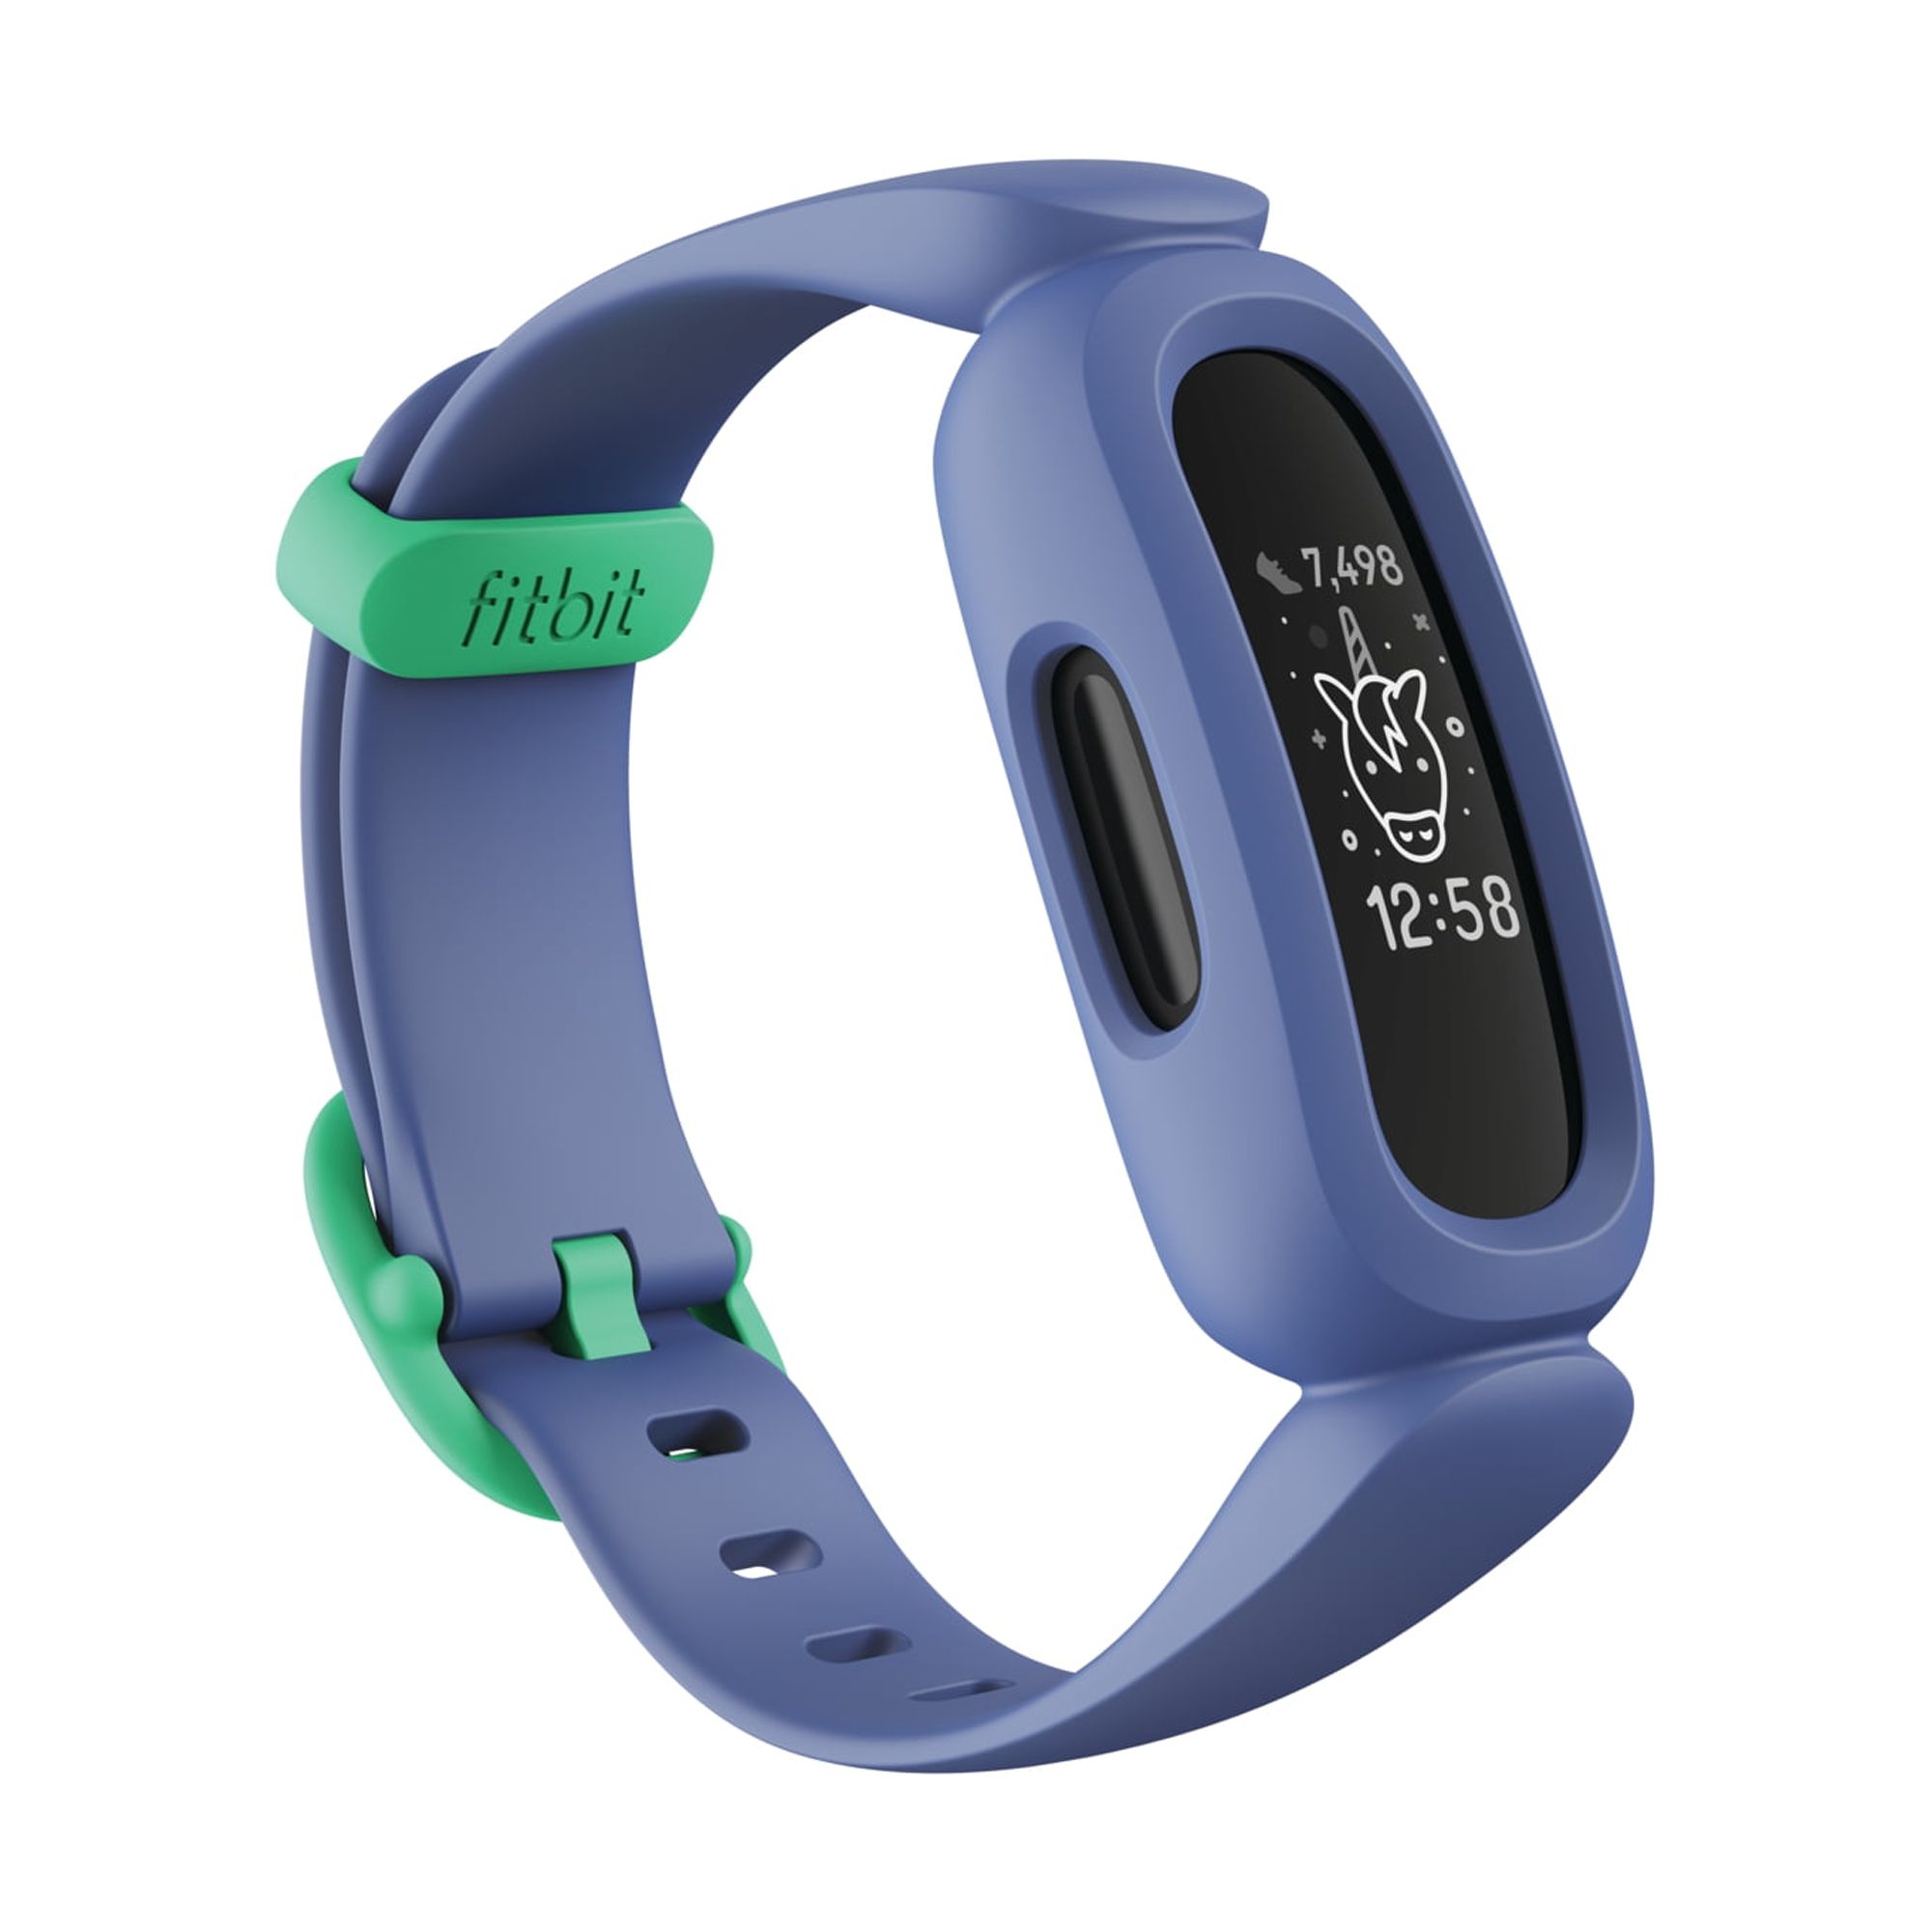 Fitbit Ace 3 Activity Tracker for Kids - Cosmic Blue/Astro Green - image 1 of 6